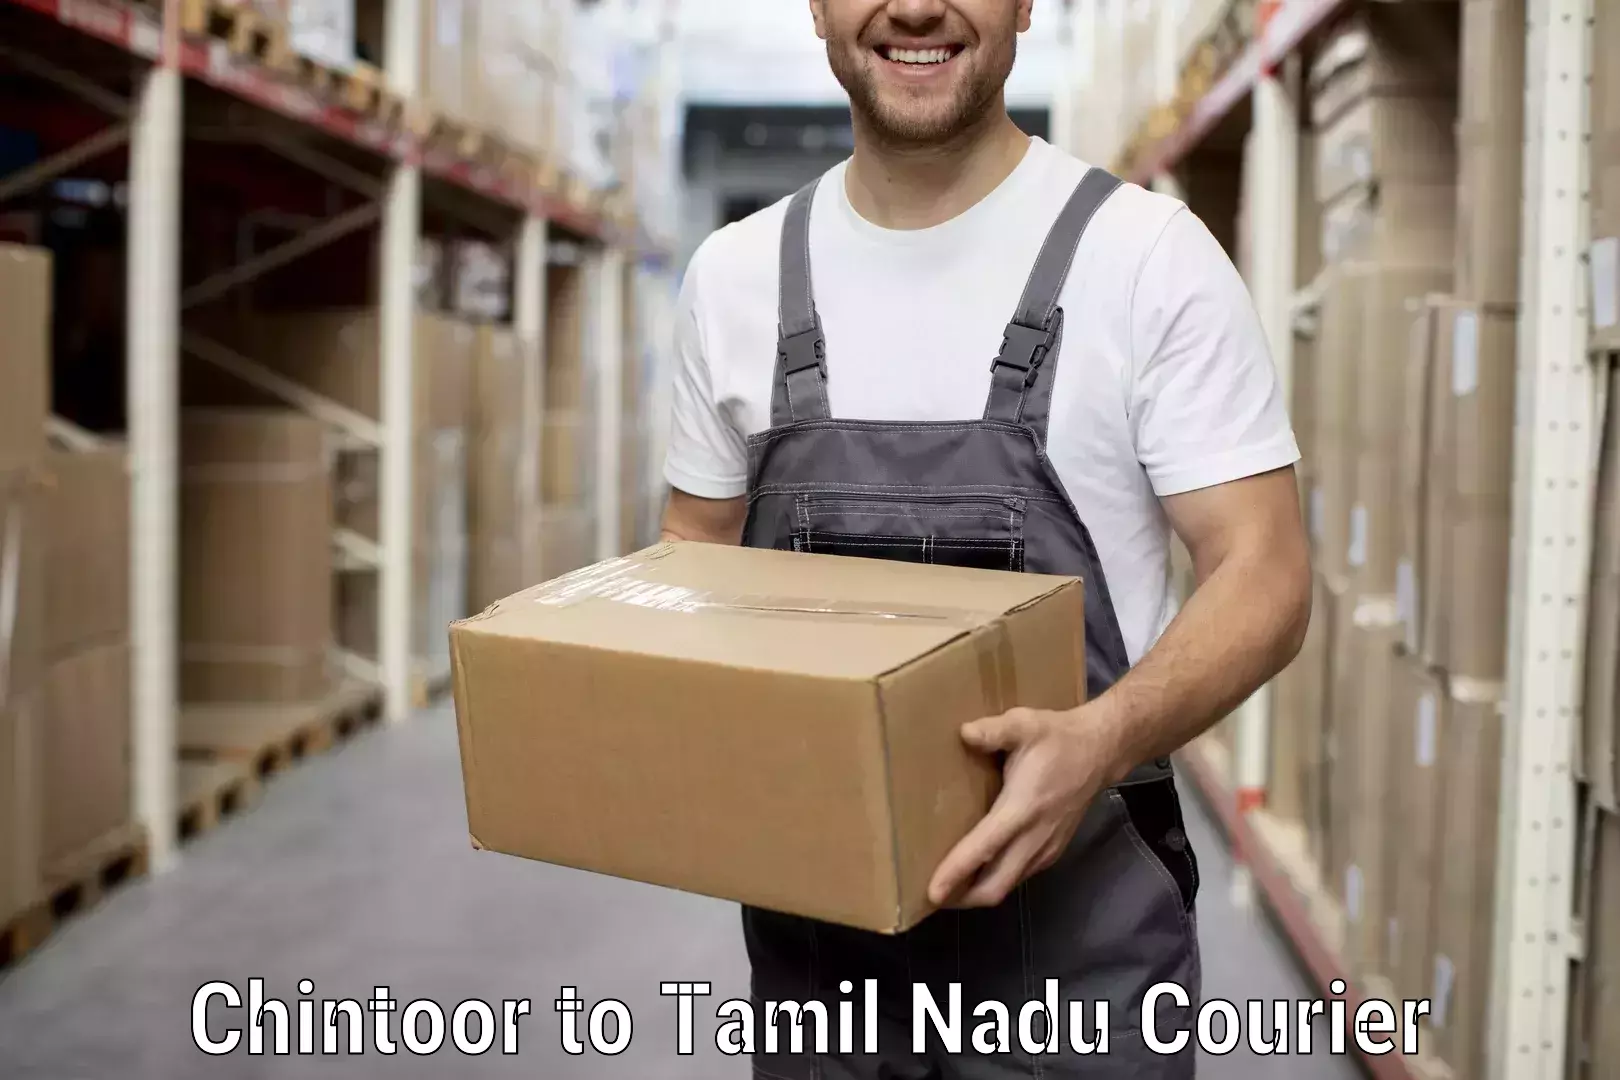 Reliable movers Chintoor to Perunali